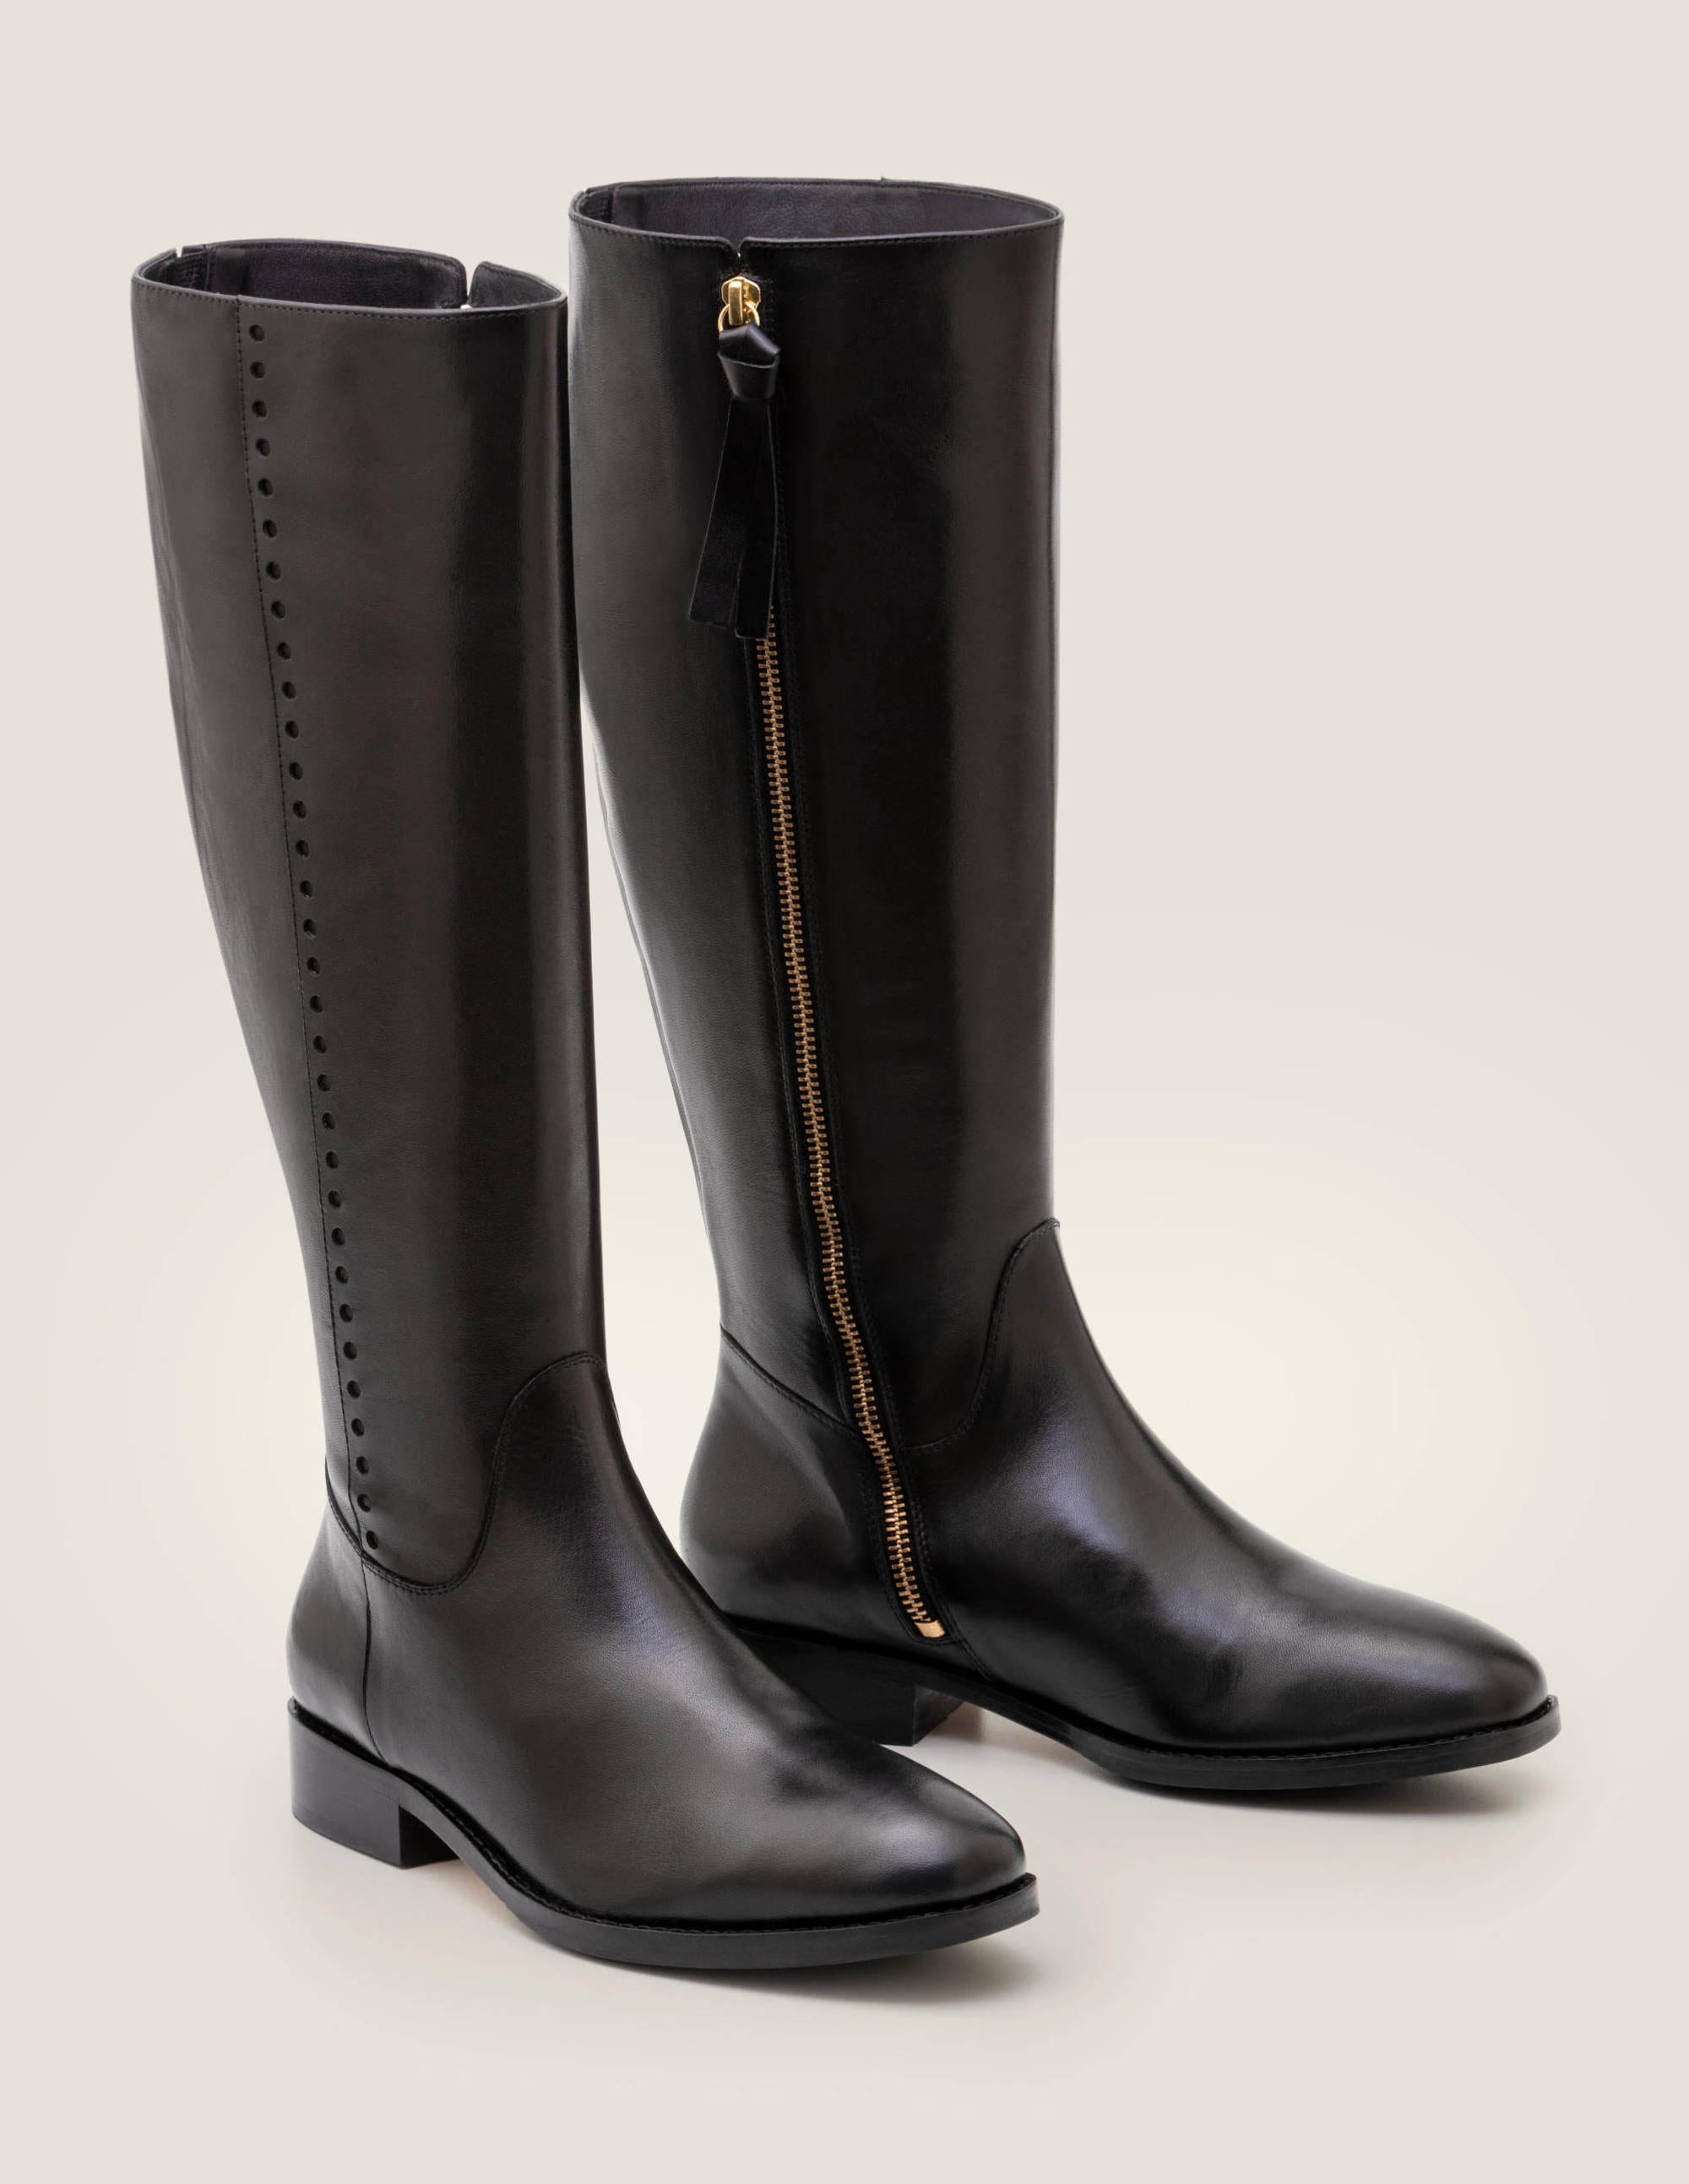 Allercombe Knee High Boots - Black 